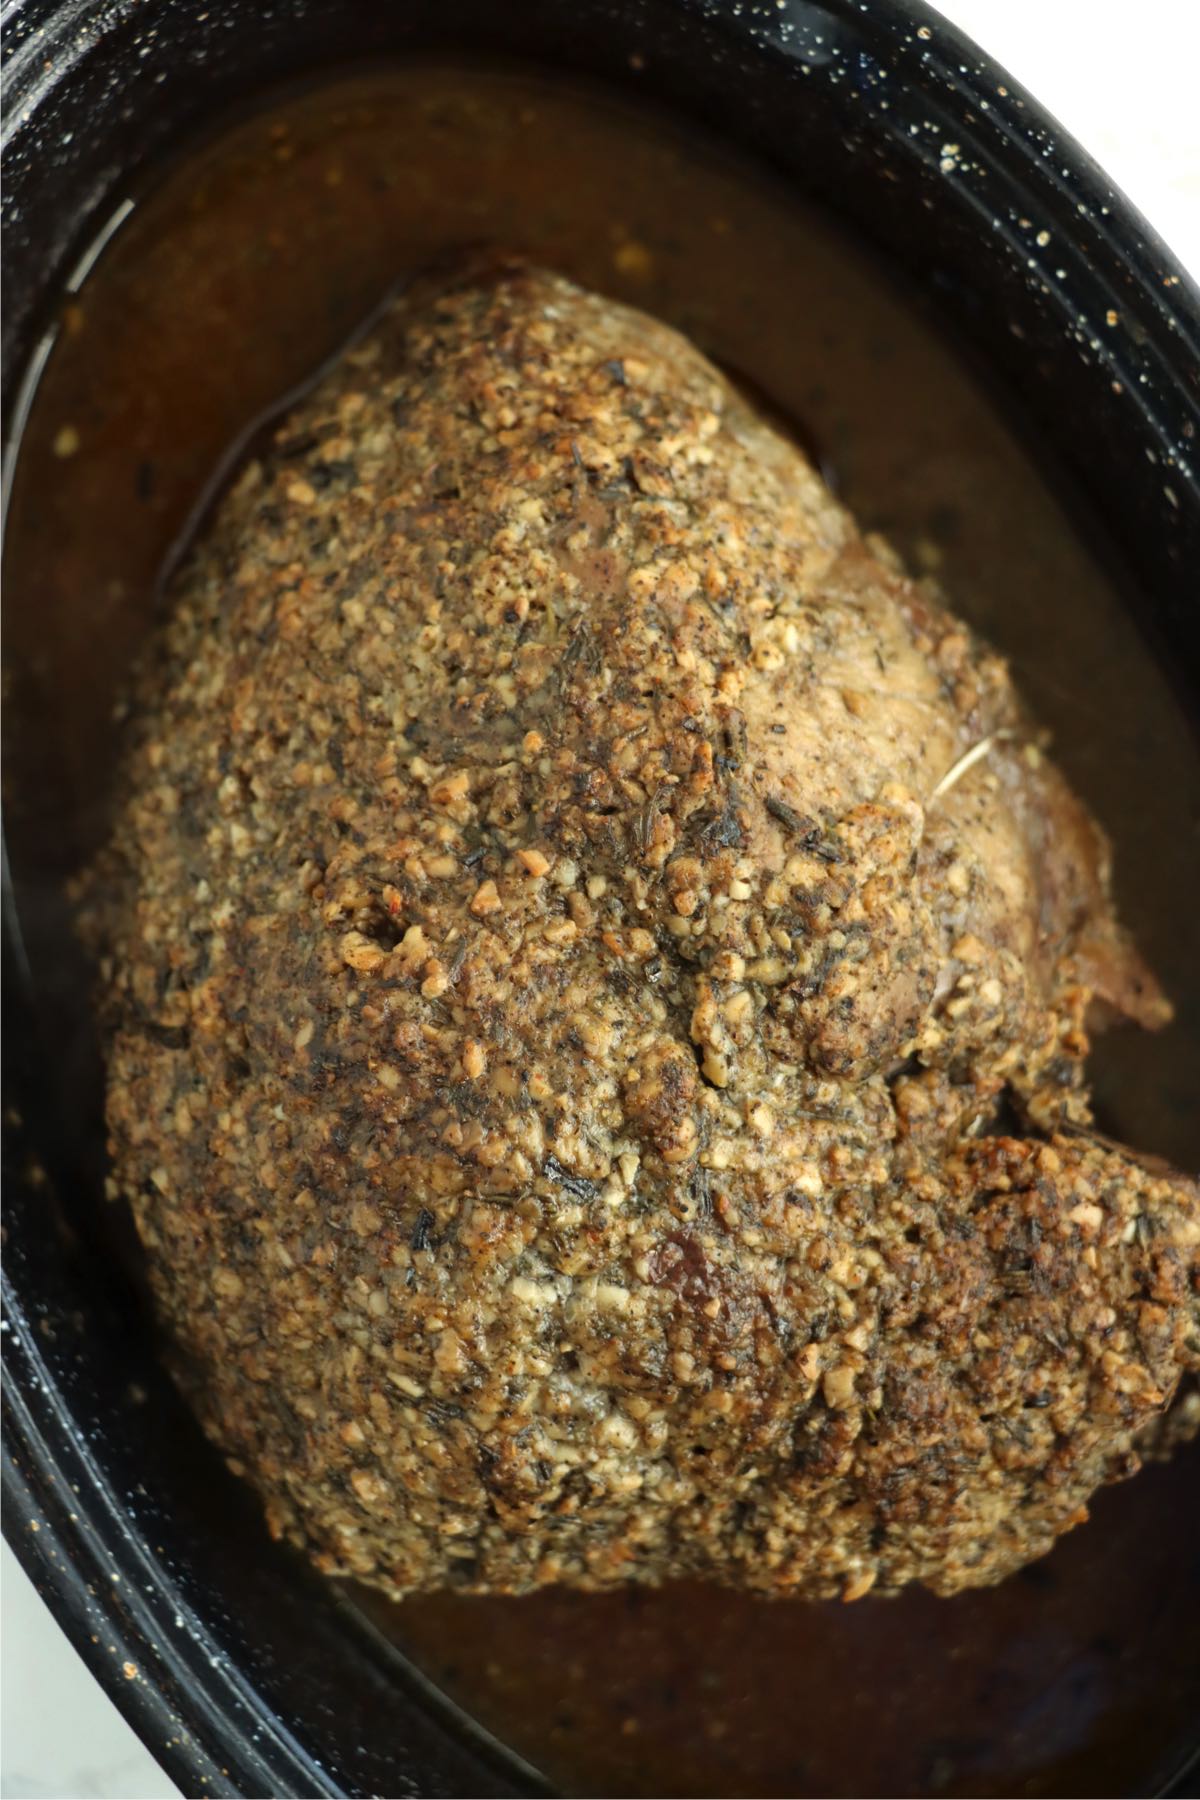 Cooked sirloin tip roast in a baking pan